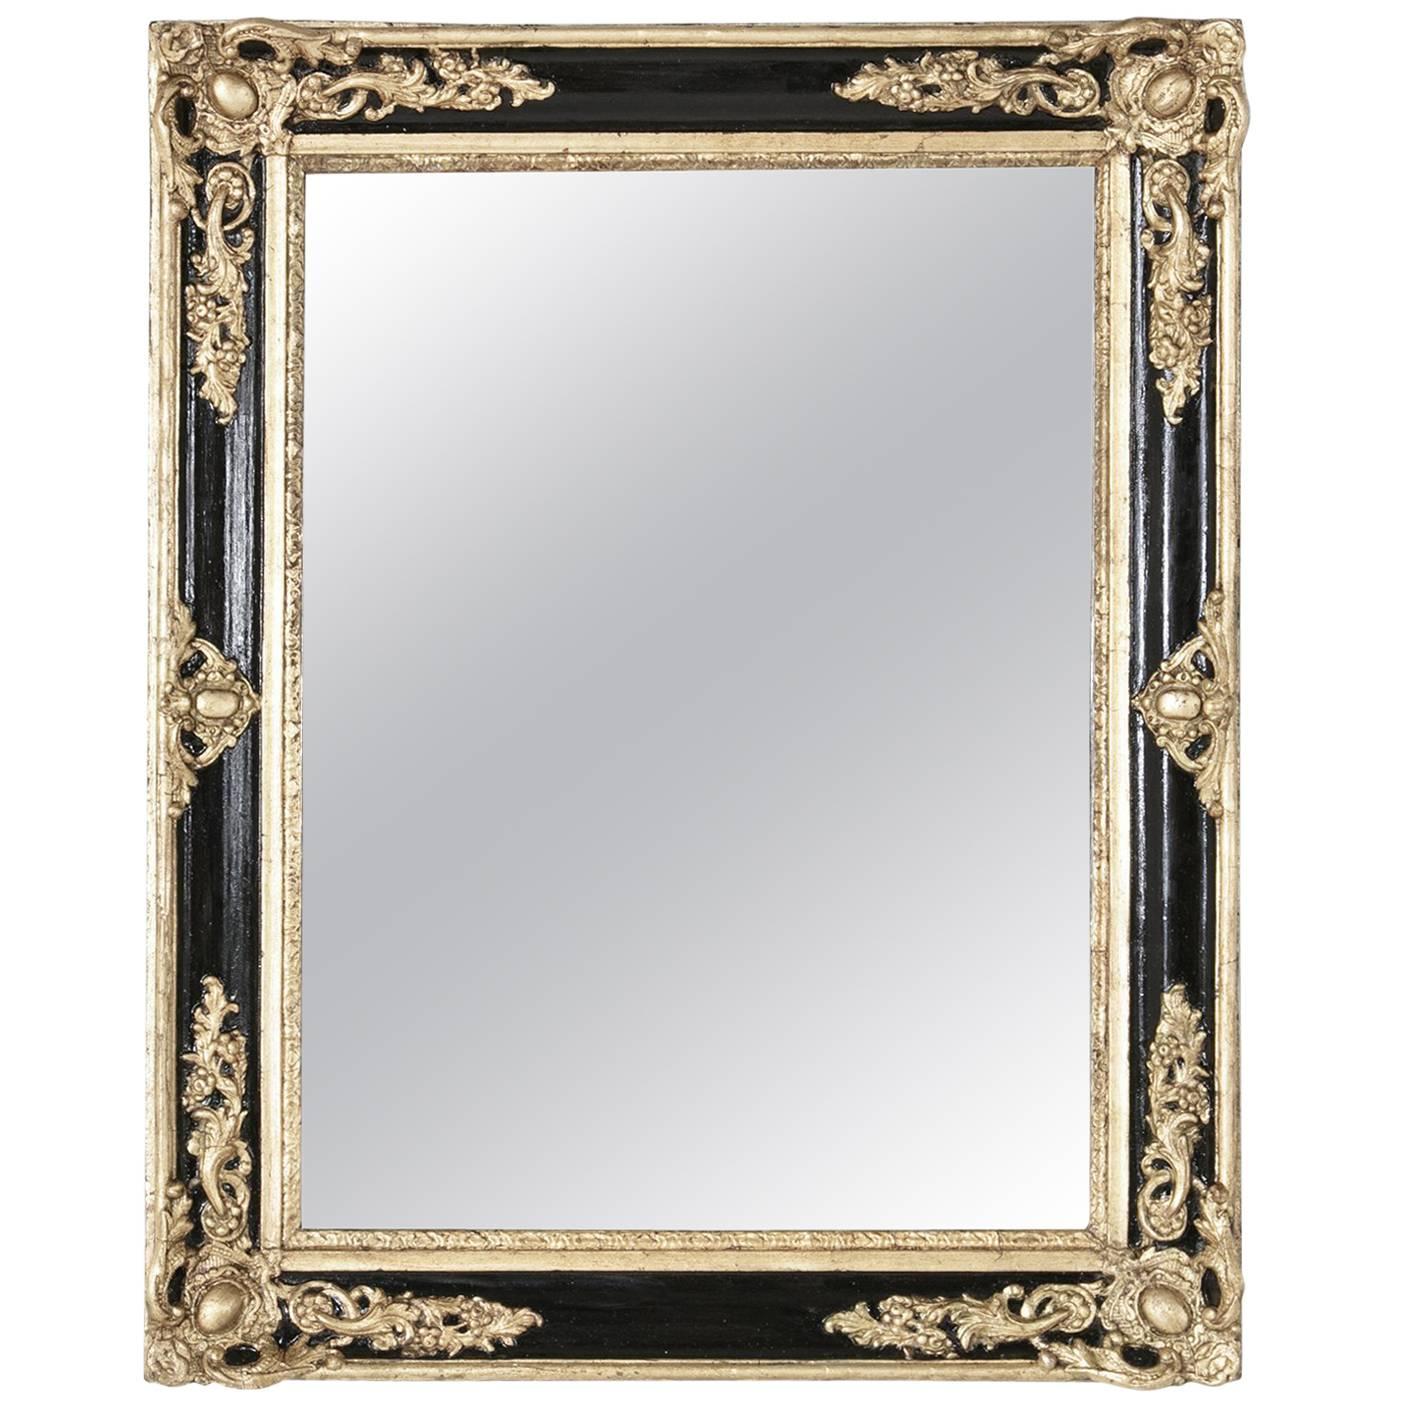 19th Century French Black and Giltwood Mirror with Original Mercury Glass